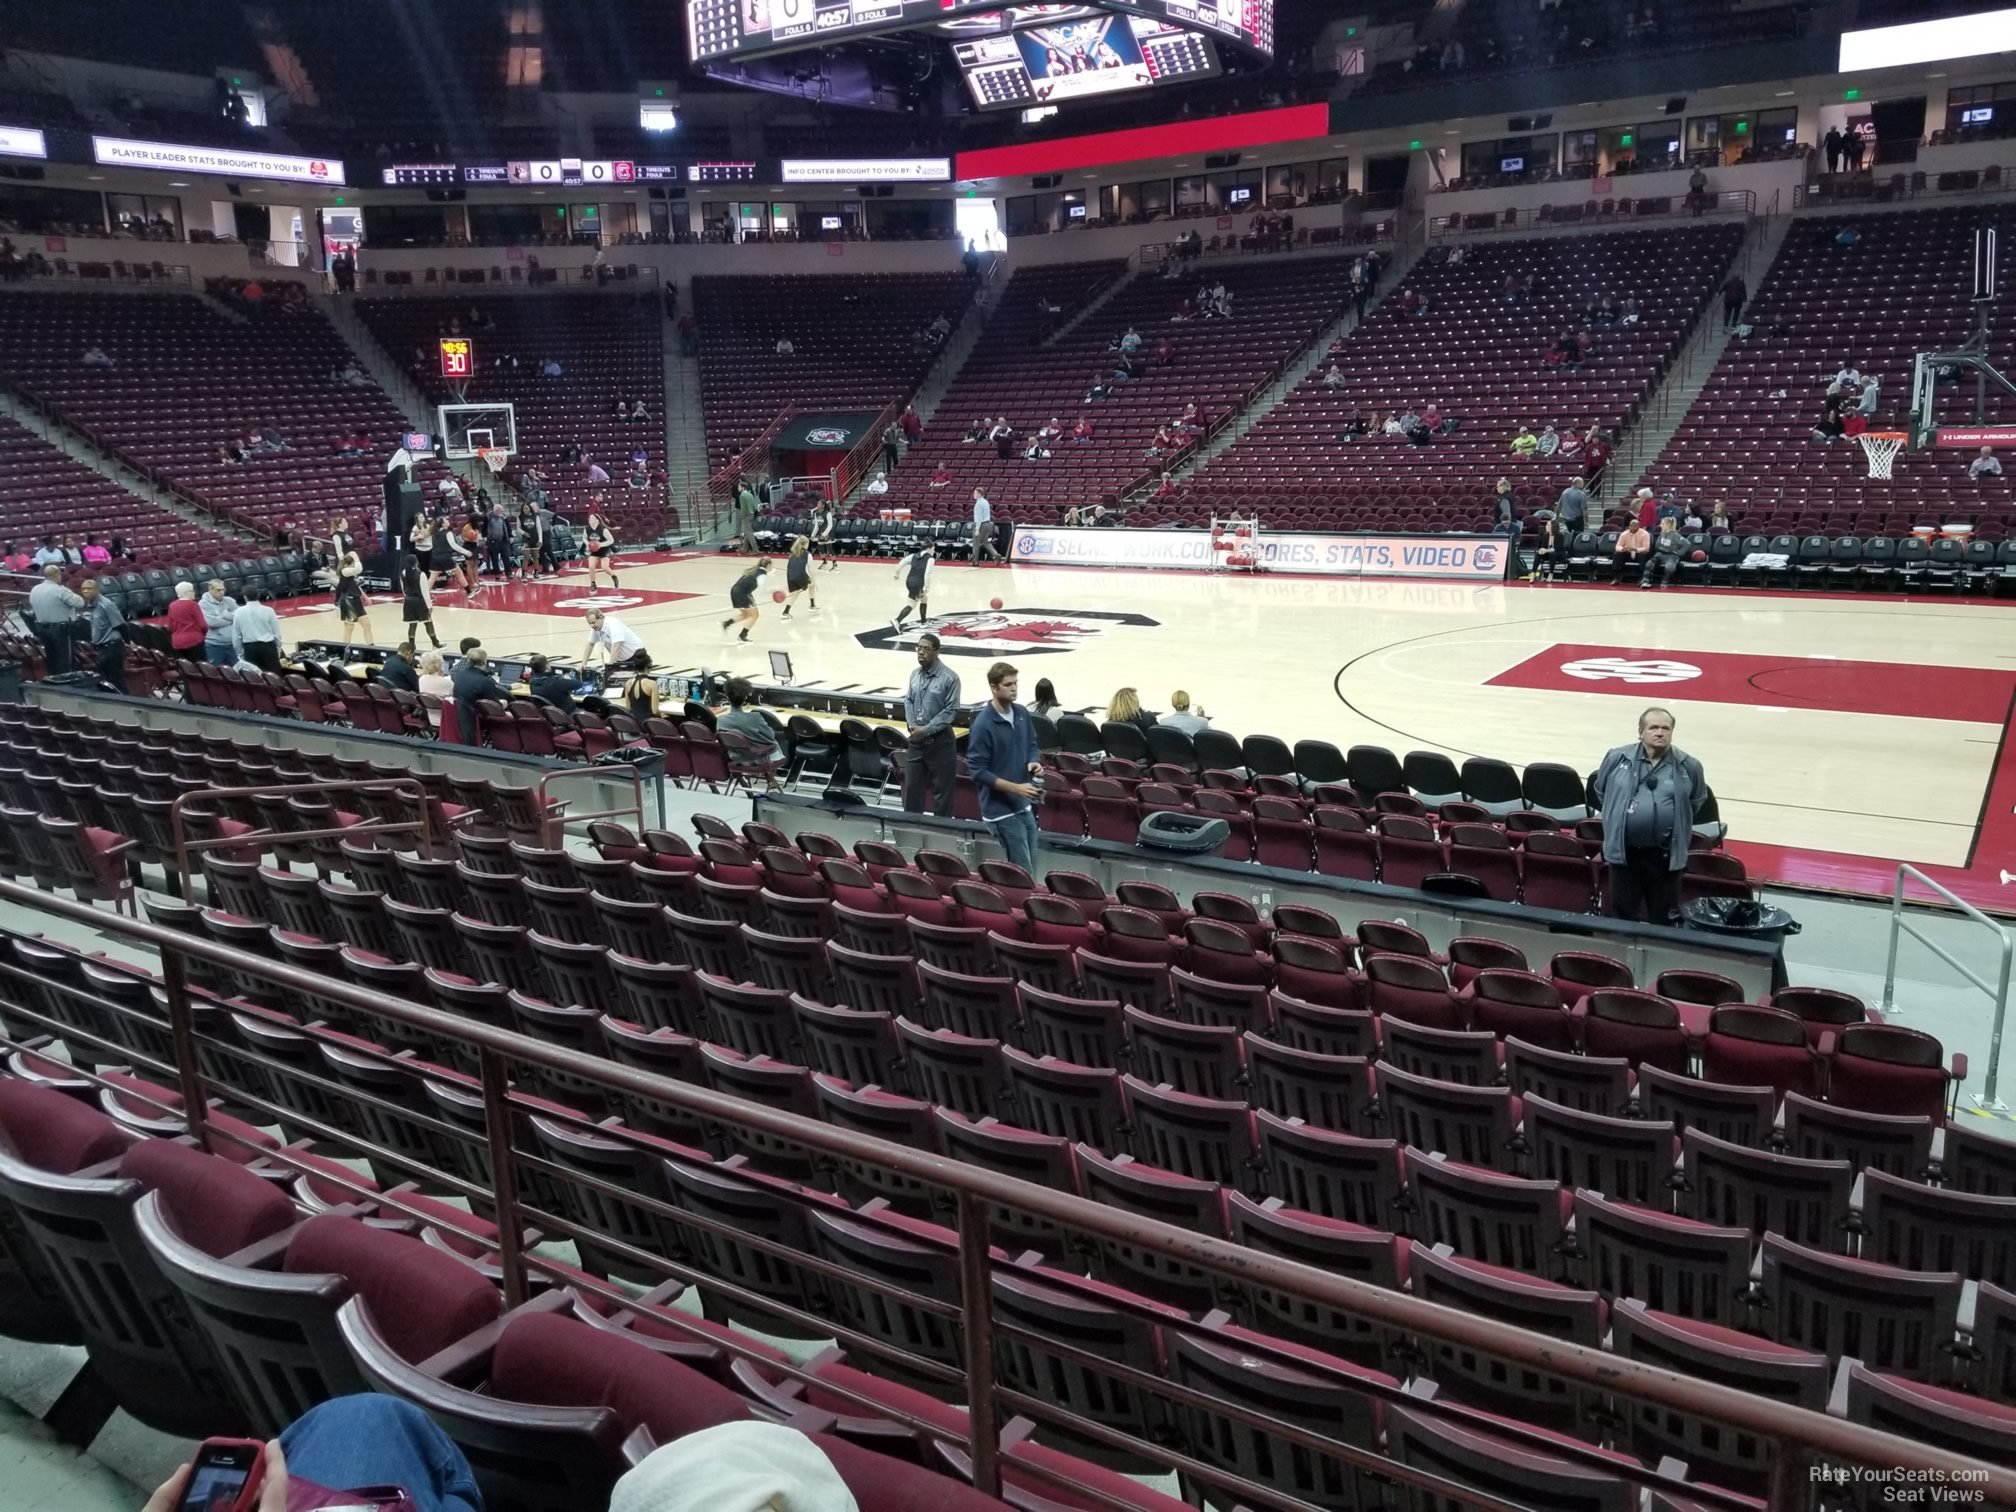 section 113, row 10 seat view  for basketball - colonial life arena